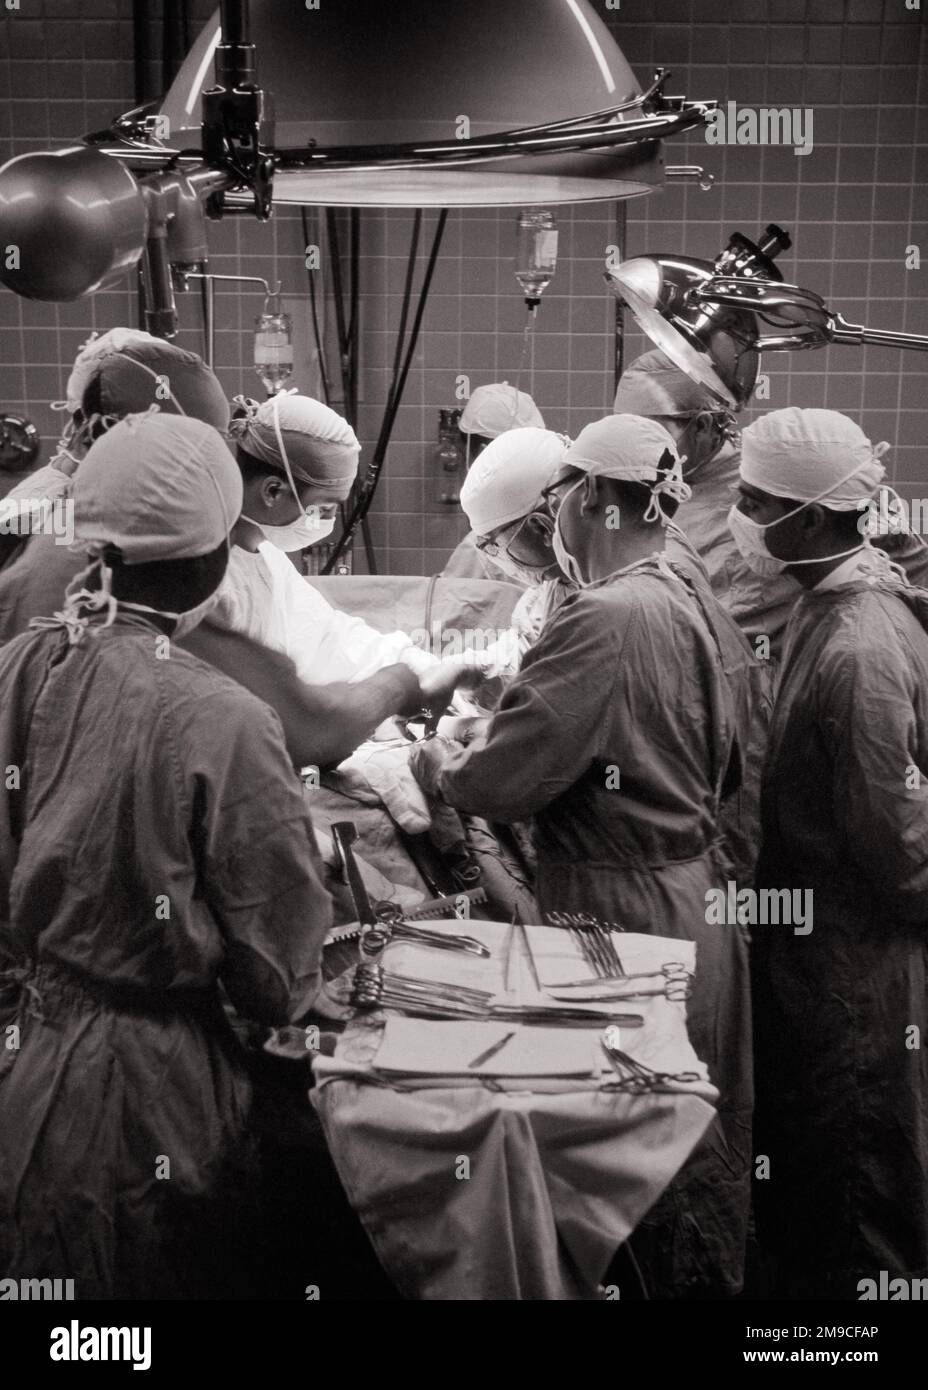 1950s ANONYMOUS SURGEONS DOCTORS NURSES ATTENDING SURGERY IN HOSPITAL OPERATING ROOM ALL IN STERILE GOWNS CAPS MASKS - m339 HAR001 HARS PHYSICIANS SURGEONS GOWNS OPERATING ROOM HEALTH CARE IMPAIRMENT OCCUPATIONS SURGEON TREATMENT HEALER CAPS HOSPITALS OPERATION PHYSICIAN PRACTITIONER FACILITY ANONYMOUS FACILITIES ATTENDING PROFESSIONALS BLACK AND WHITE CAUCASIAN ETHNICITY DISEASE HAR001 OLD FASHIONED Stock Photo